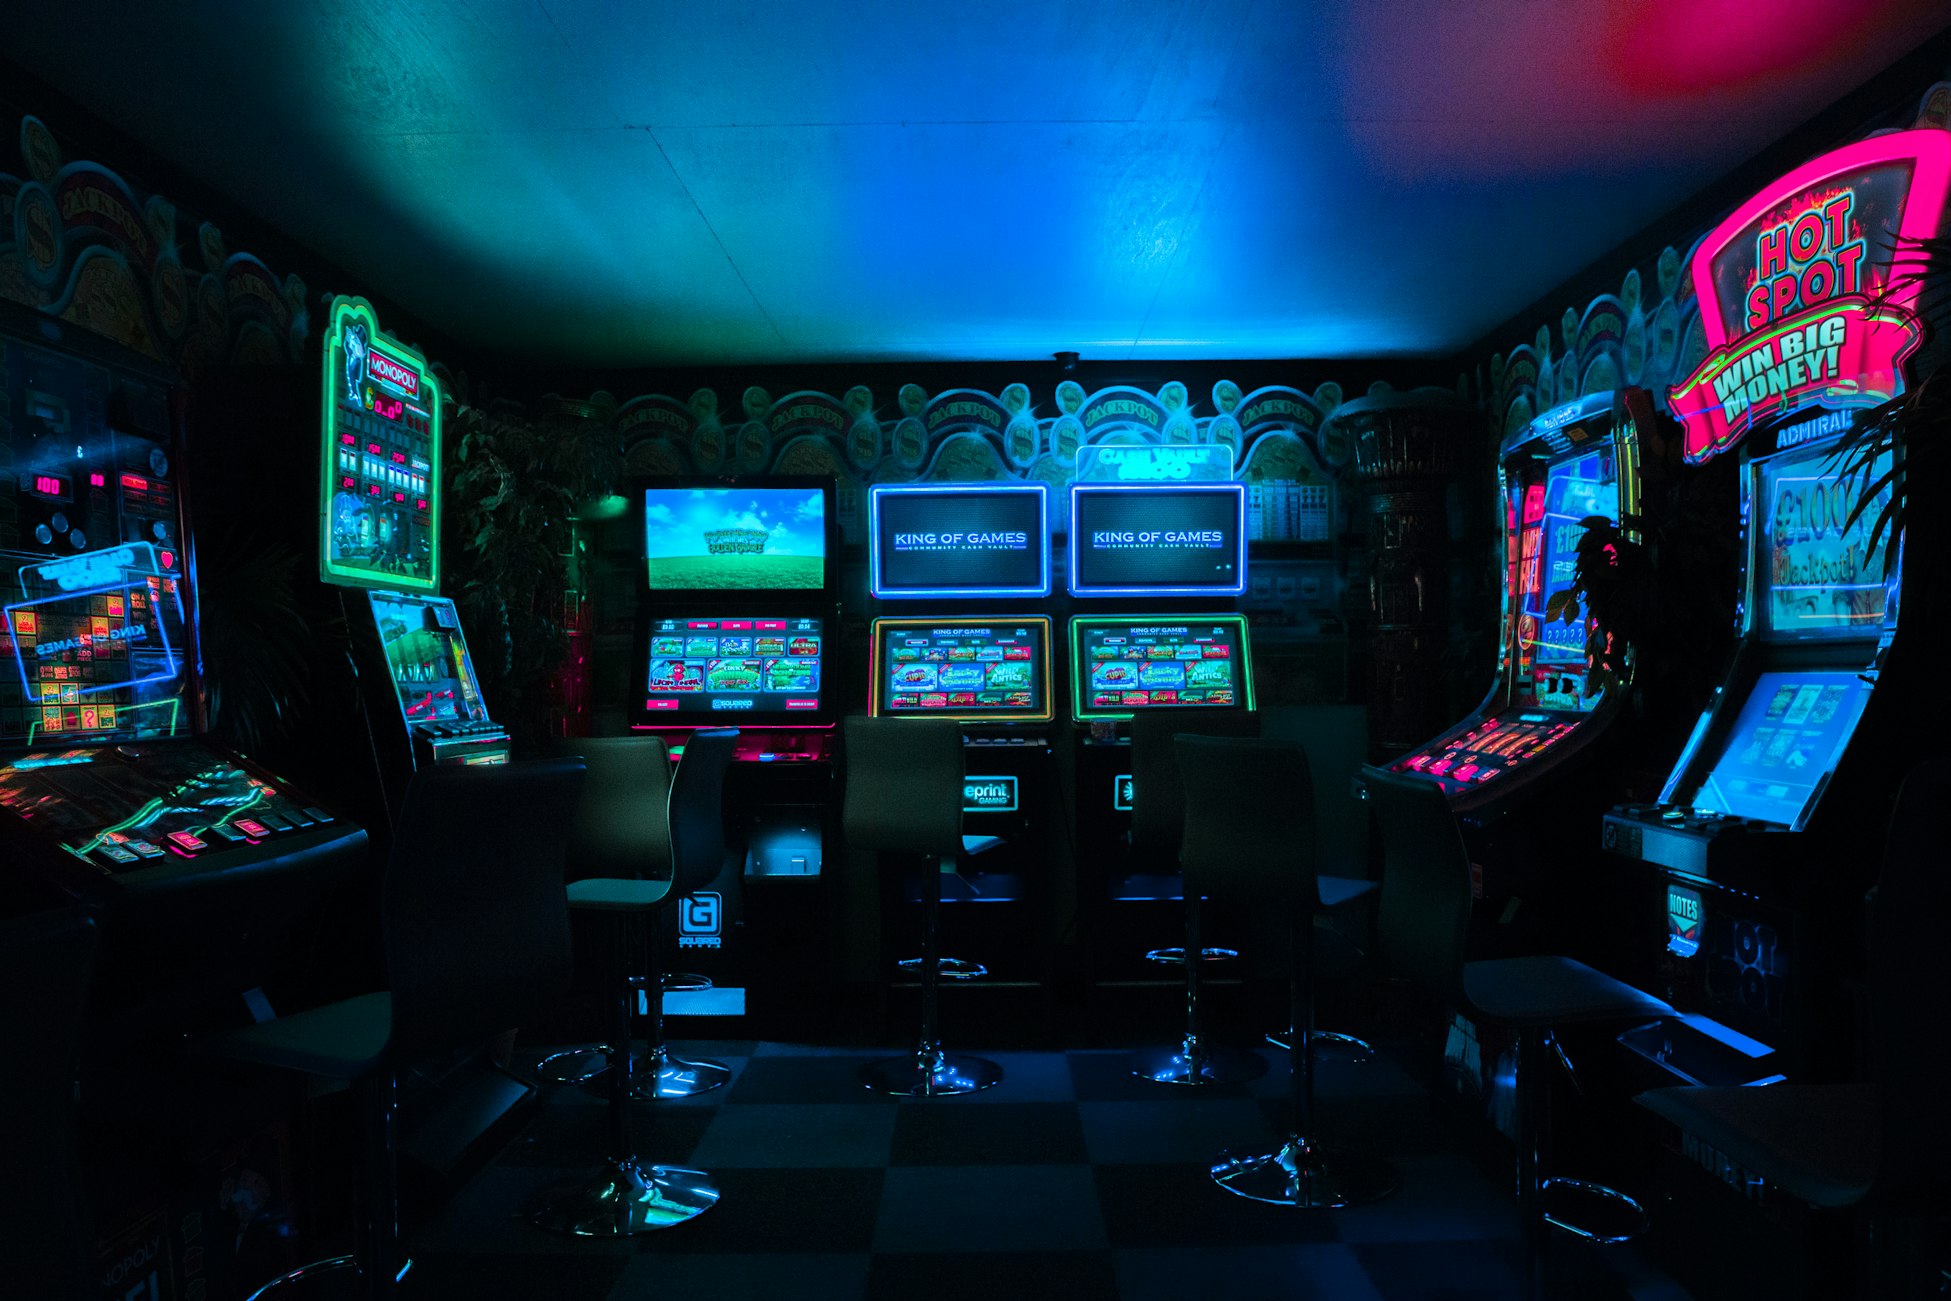 Colorful yet dark photograph of a video arcade, featuring 7 machines. Pink, blue, and green neon light from the machines suffuse the darkened room, lighting up the ceiling.